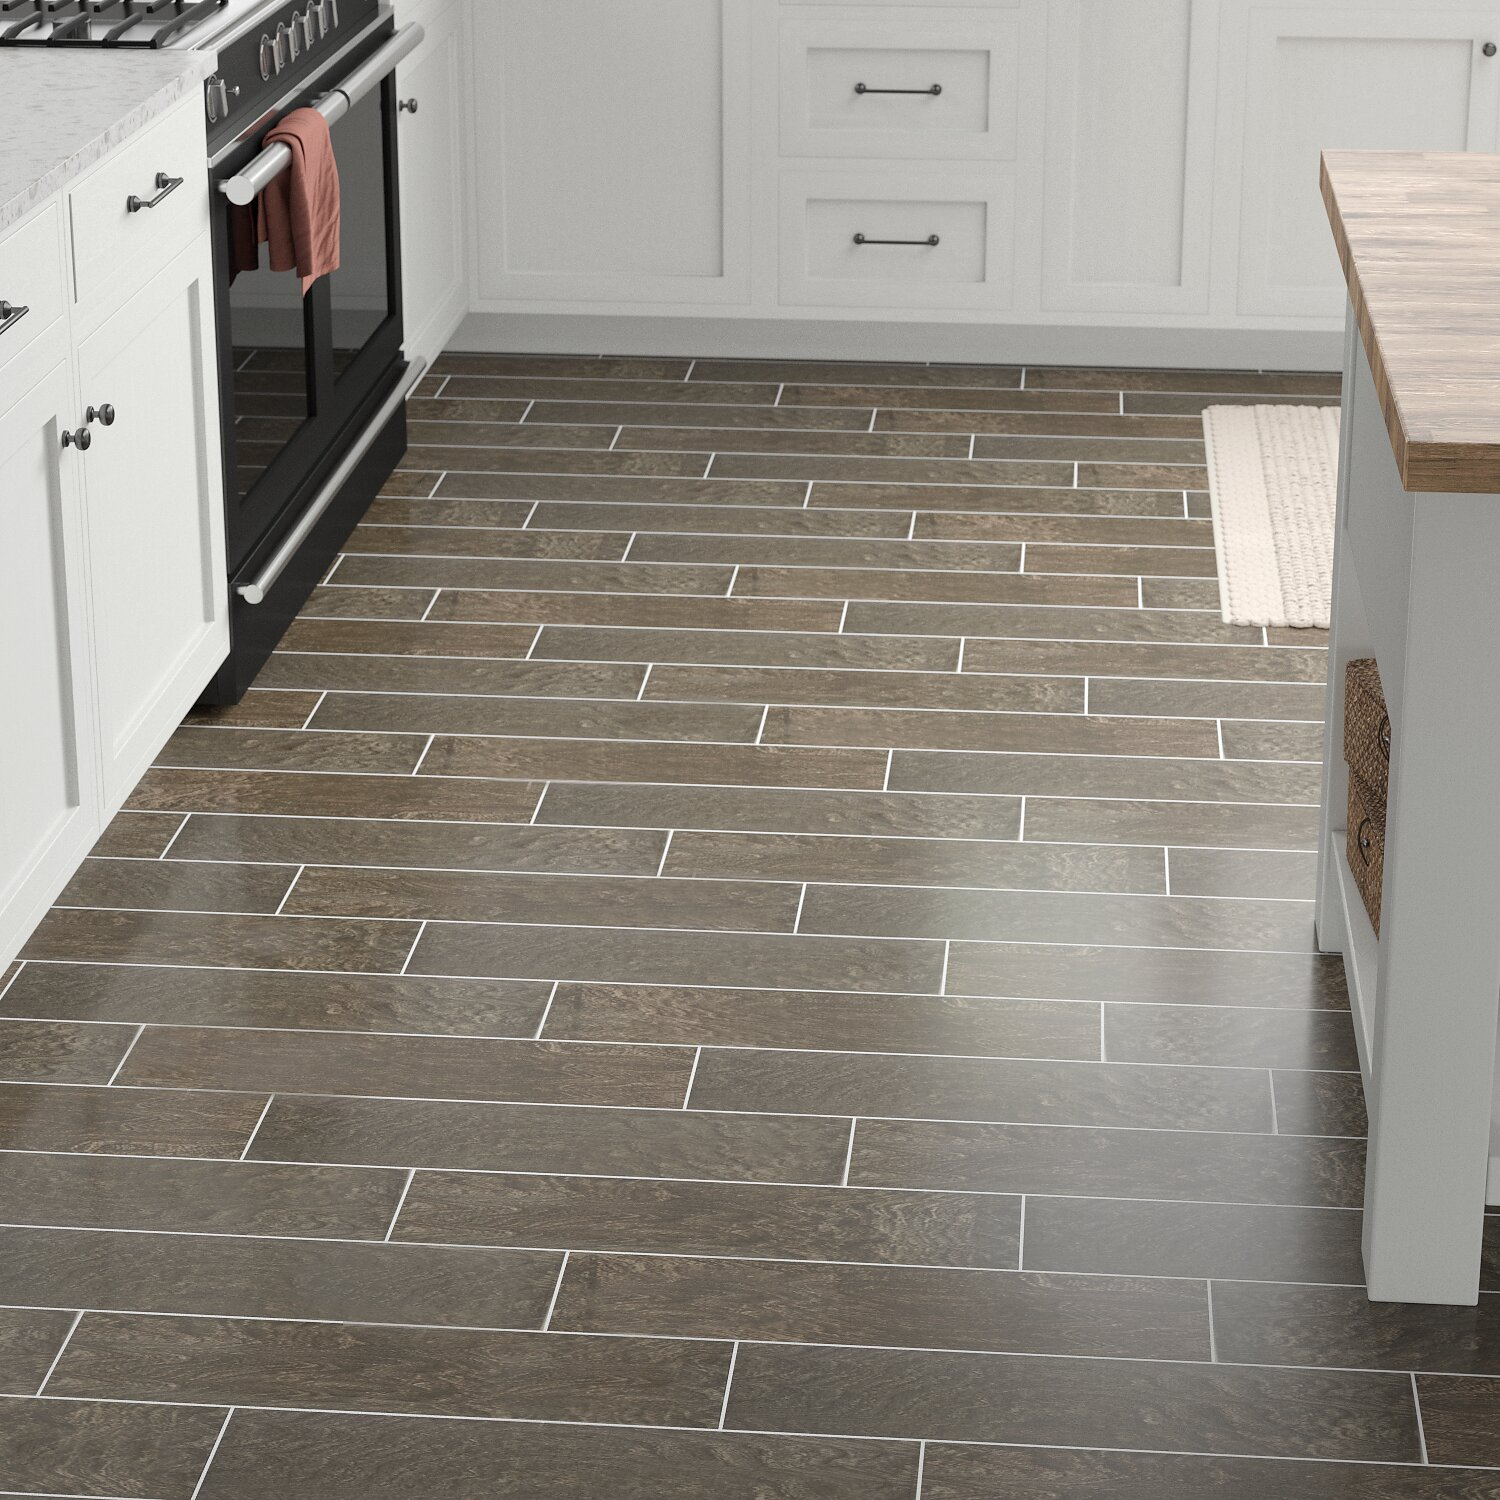 Modern Visual 6 X 24 Porcelain Wood Look Tile In Smoky Brown intended for sizing 1500 X 1500